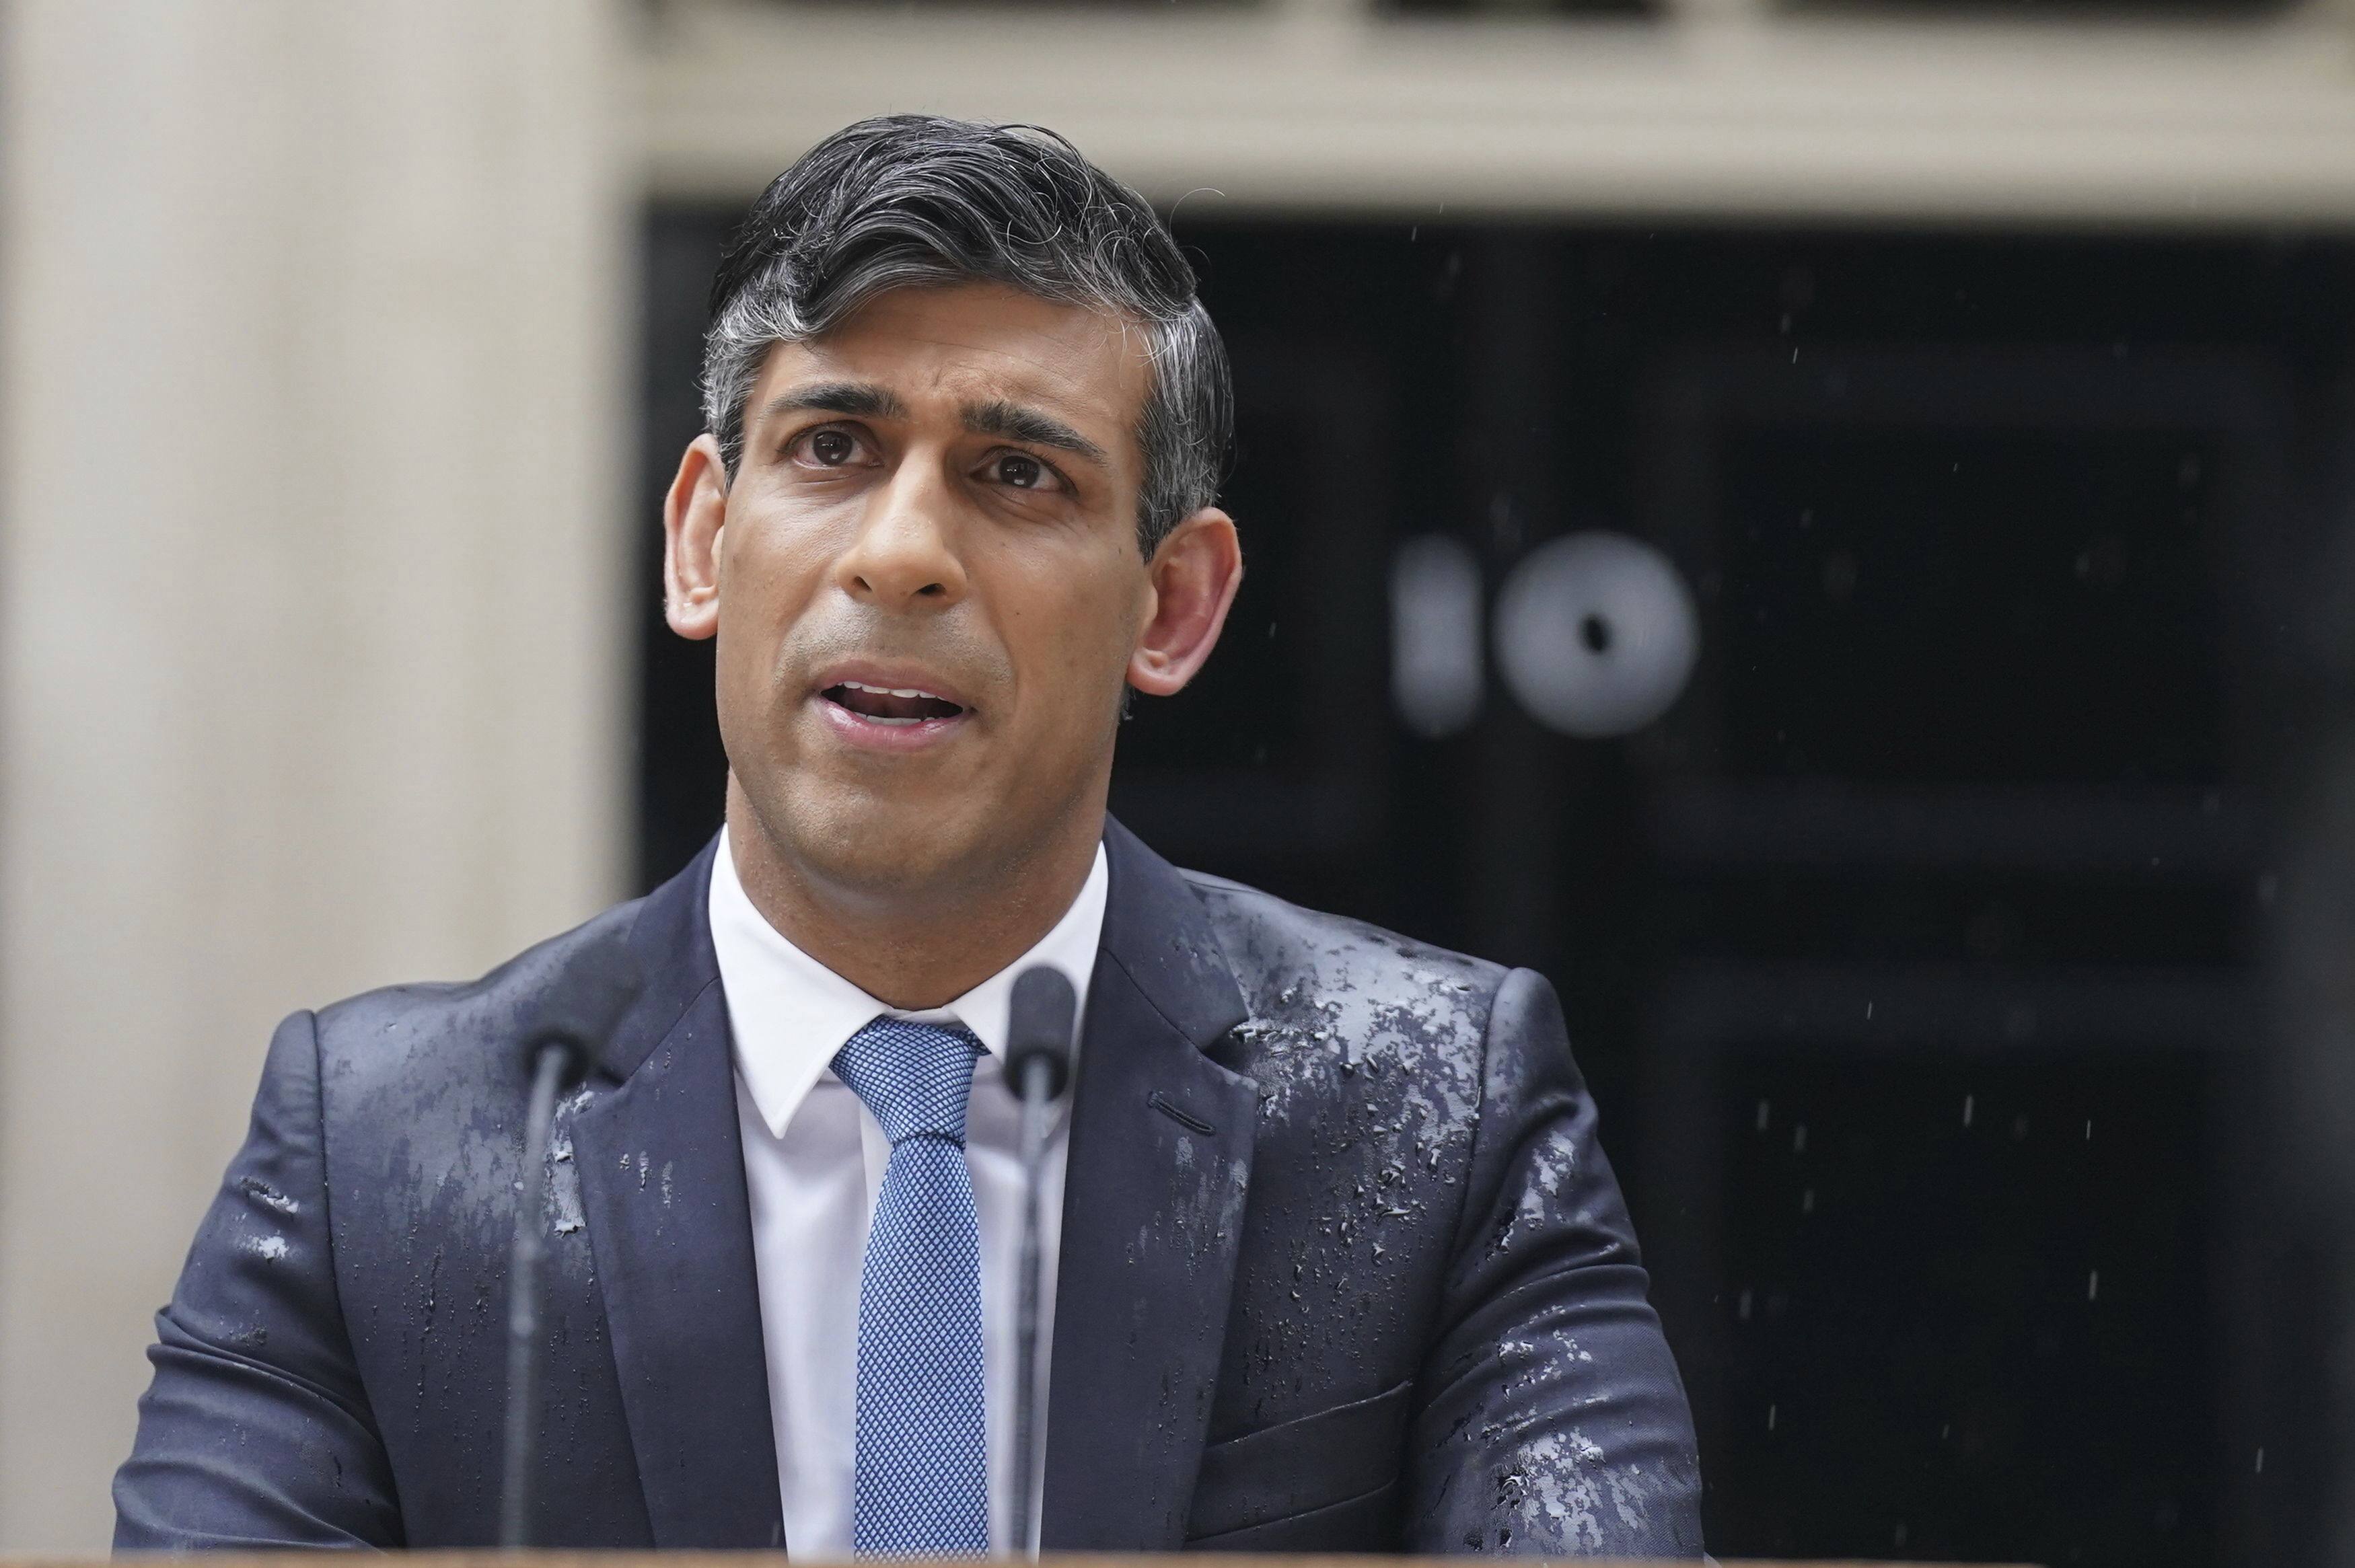 British Prime Minister Rishi Sunak delivers a speech outside 10 Downing Street in London on Wednesday. Photo: PA via AP